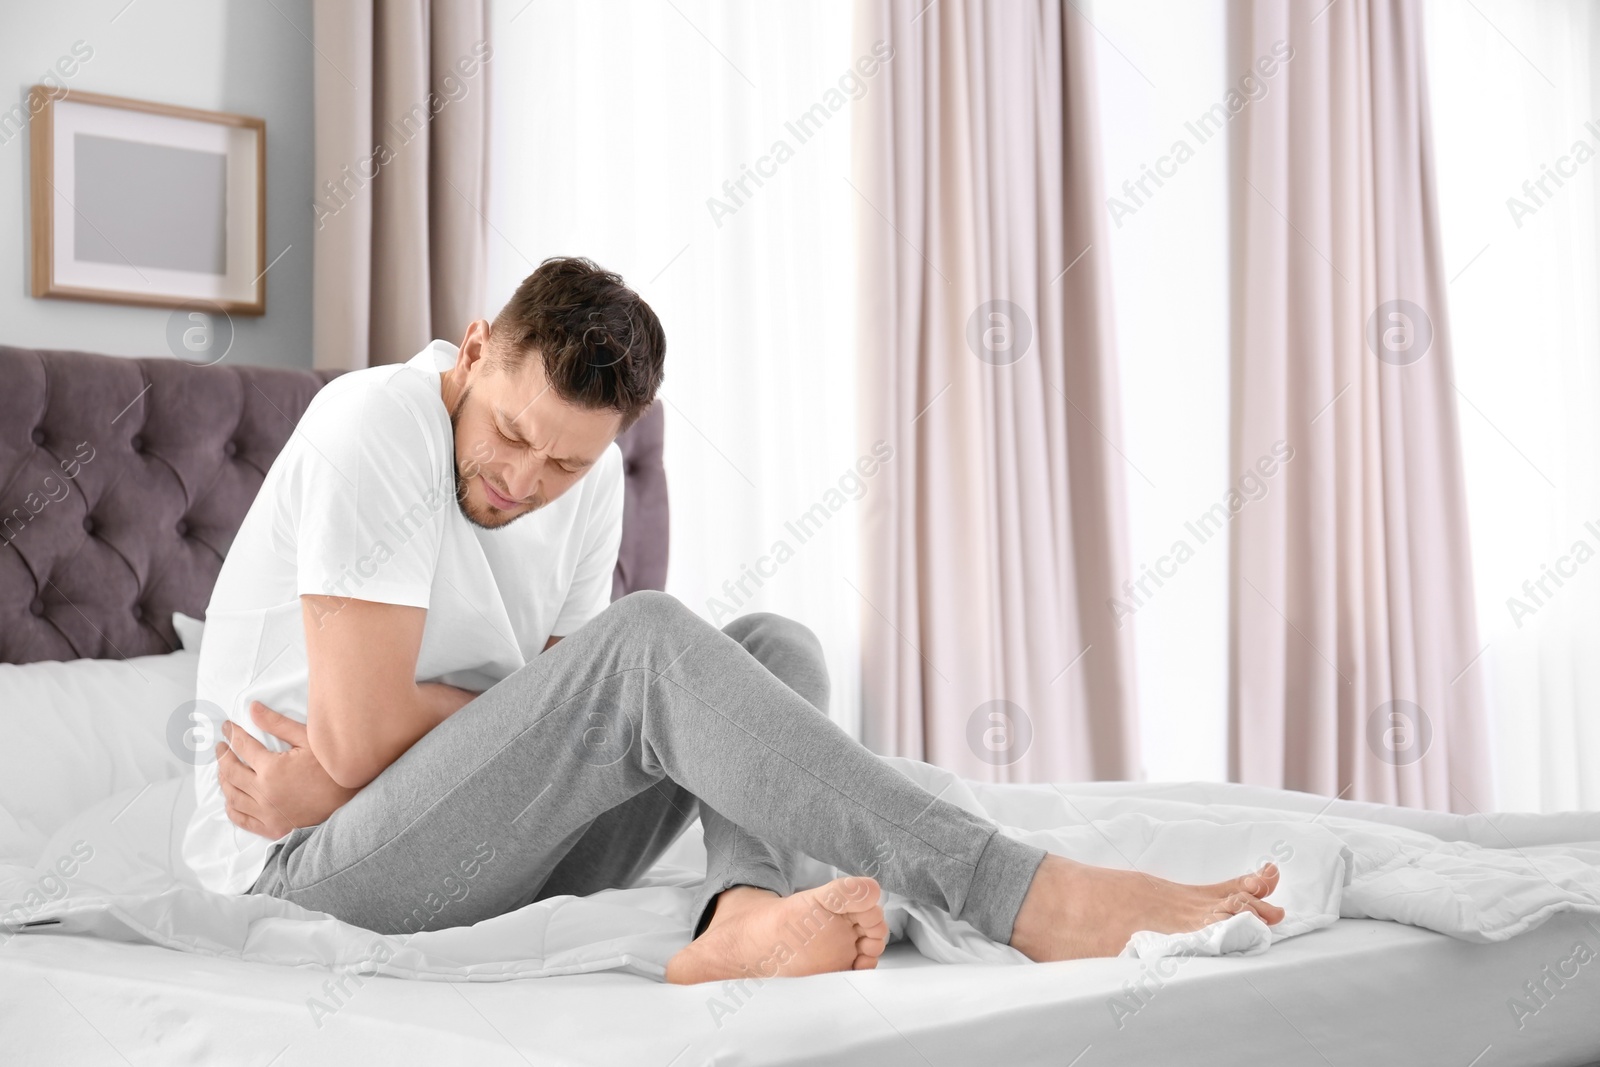 Photo of Man suffering from abdominal pain in bedroom